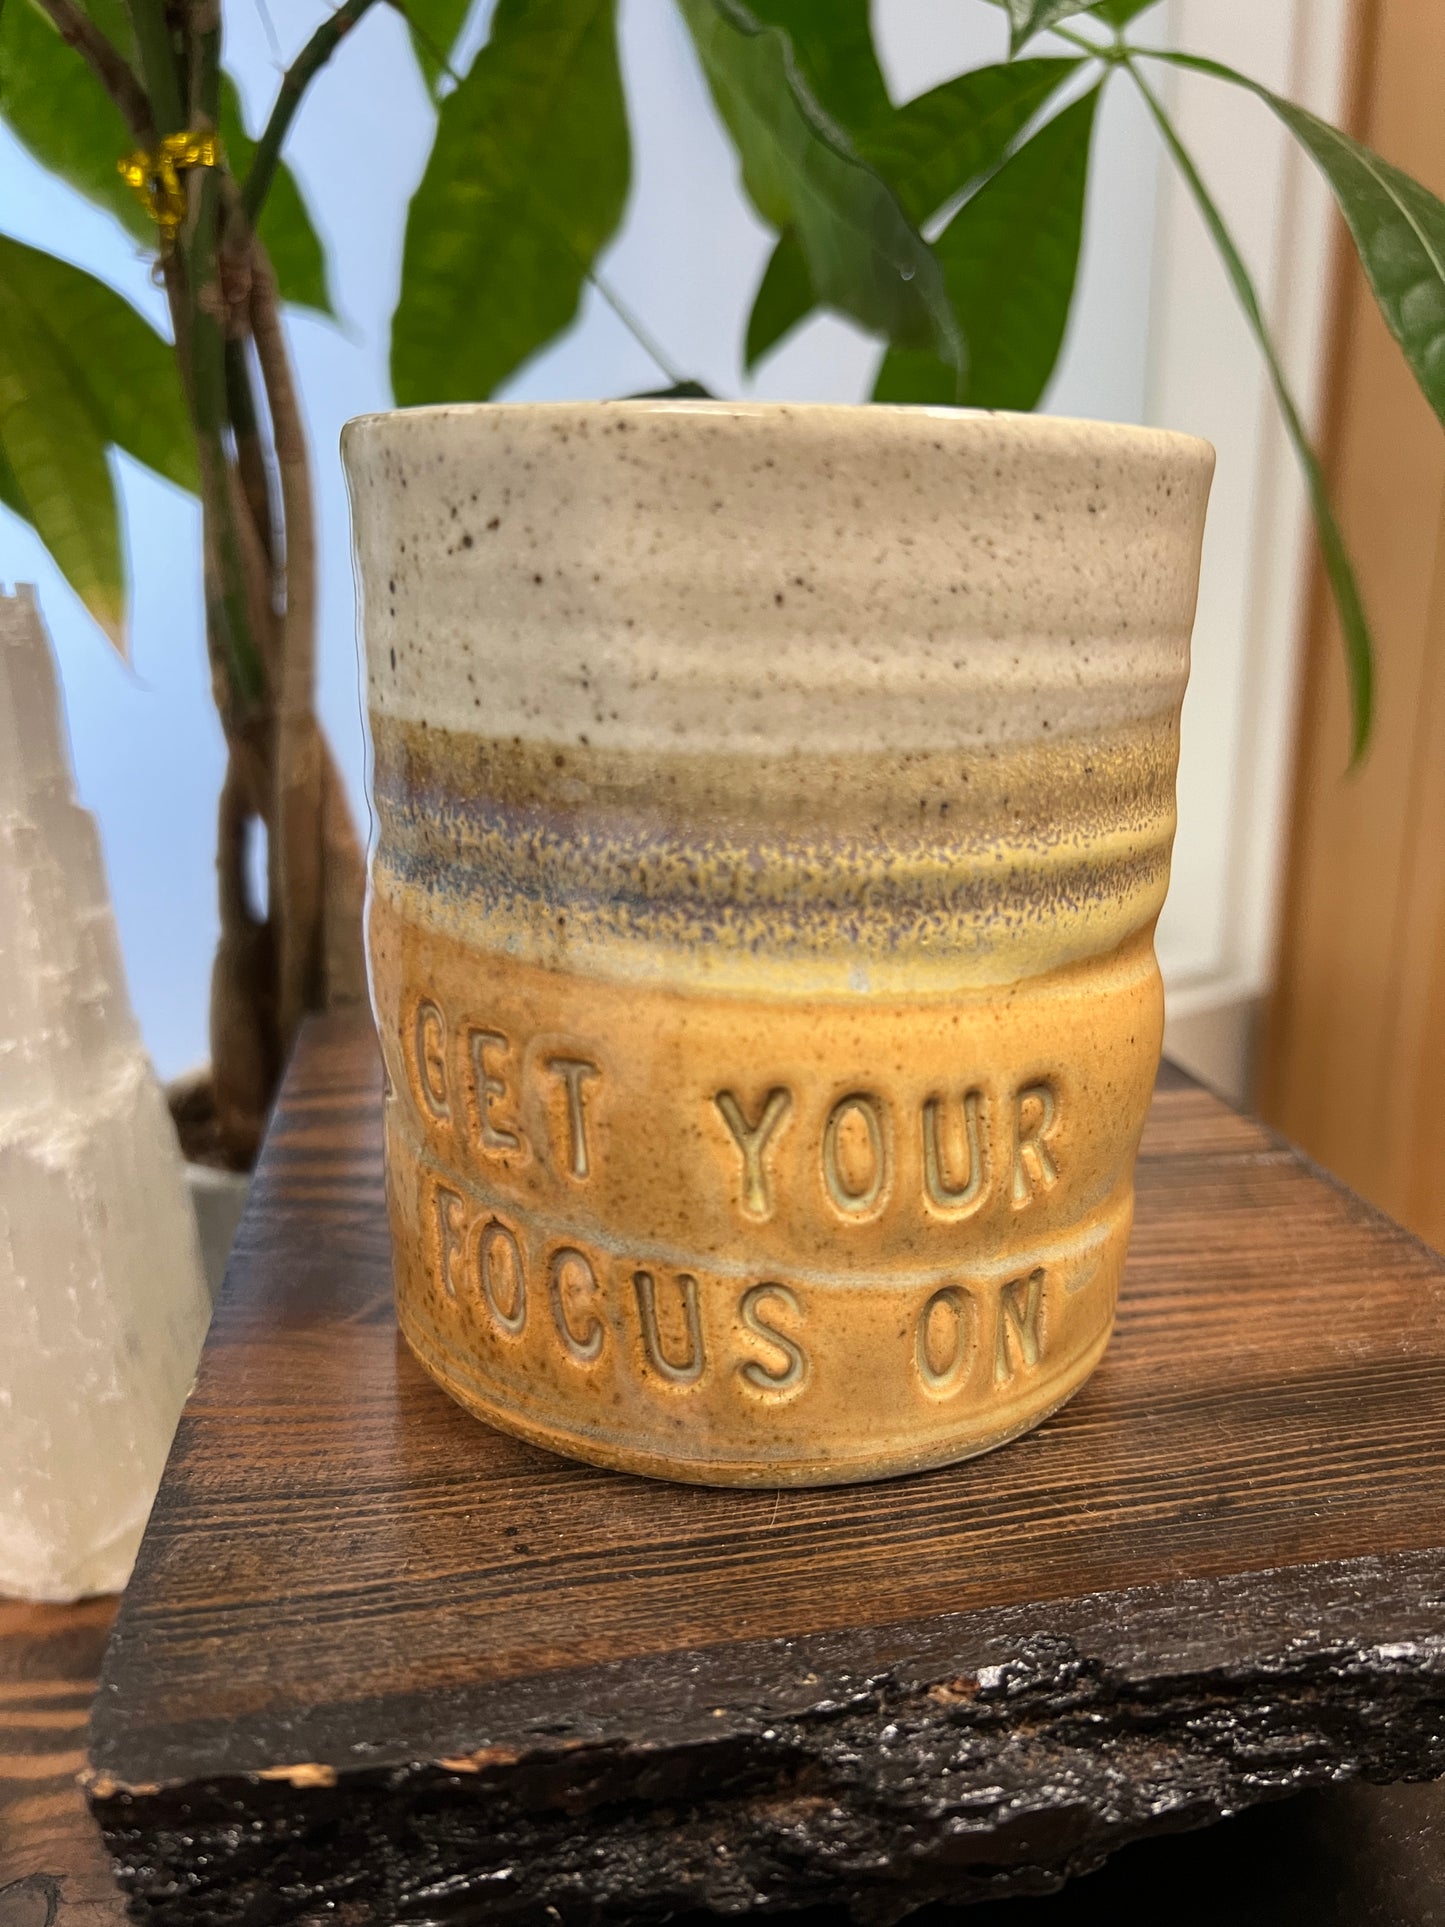 "Get Your Focus On" Coffee Mugs